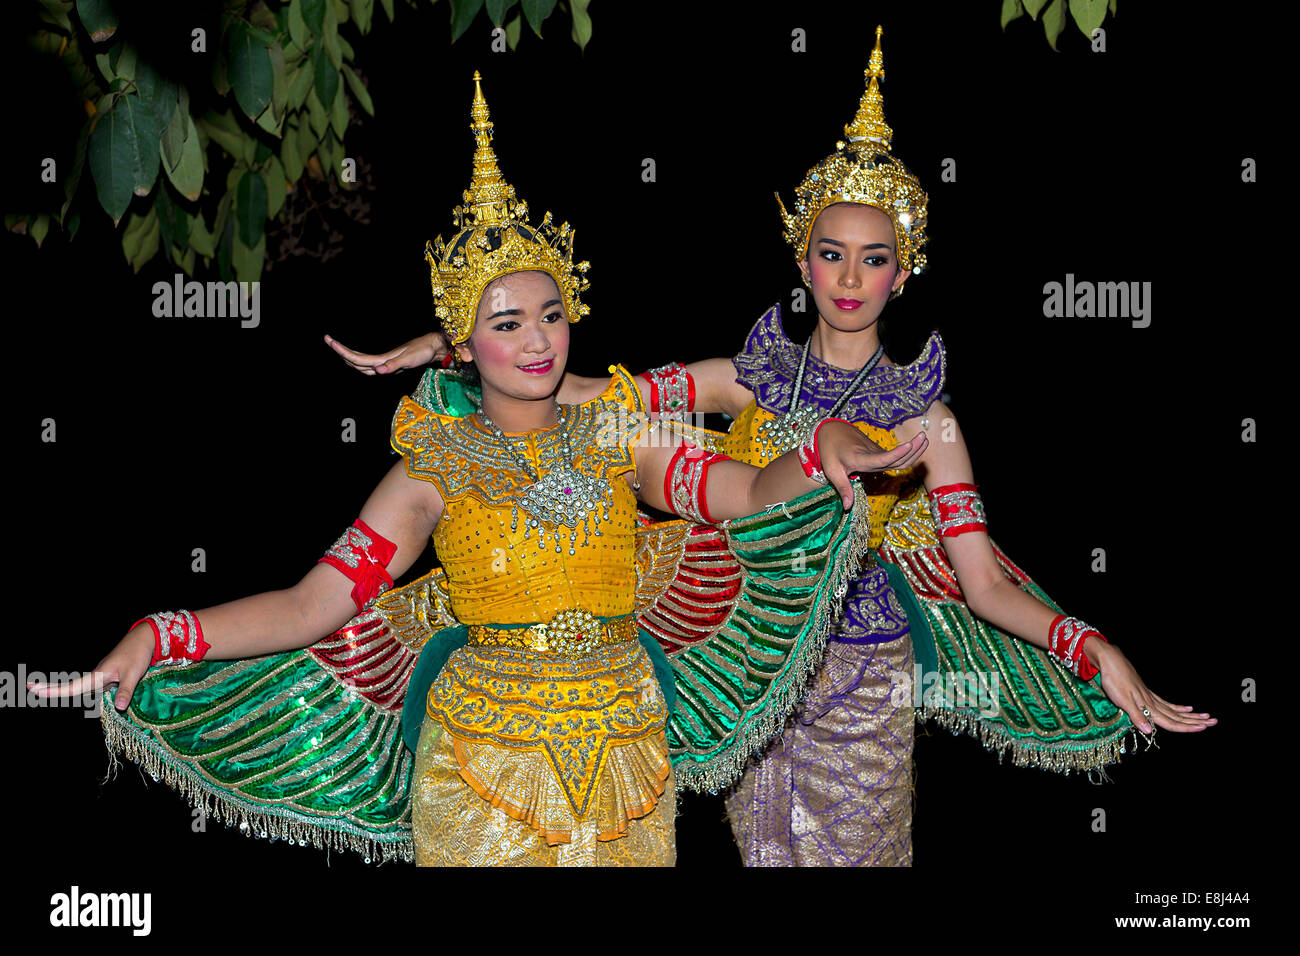 Two dancers at the Loi Krathong Festival of Lights, Chiang Mai, Thailand Stock Photo